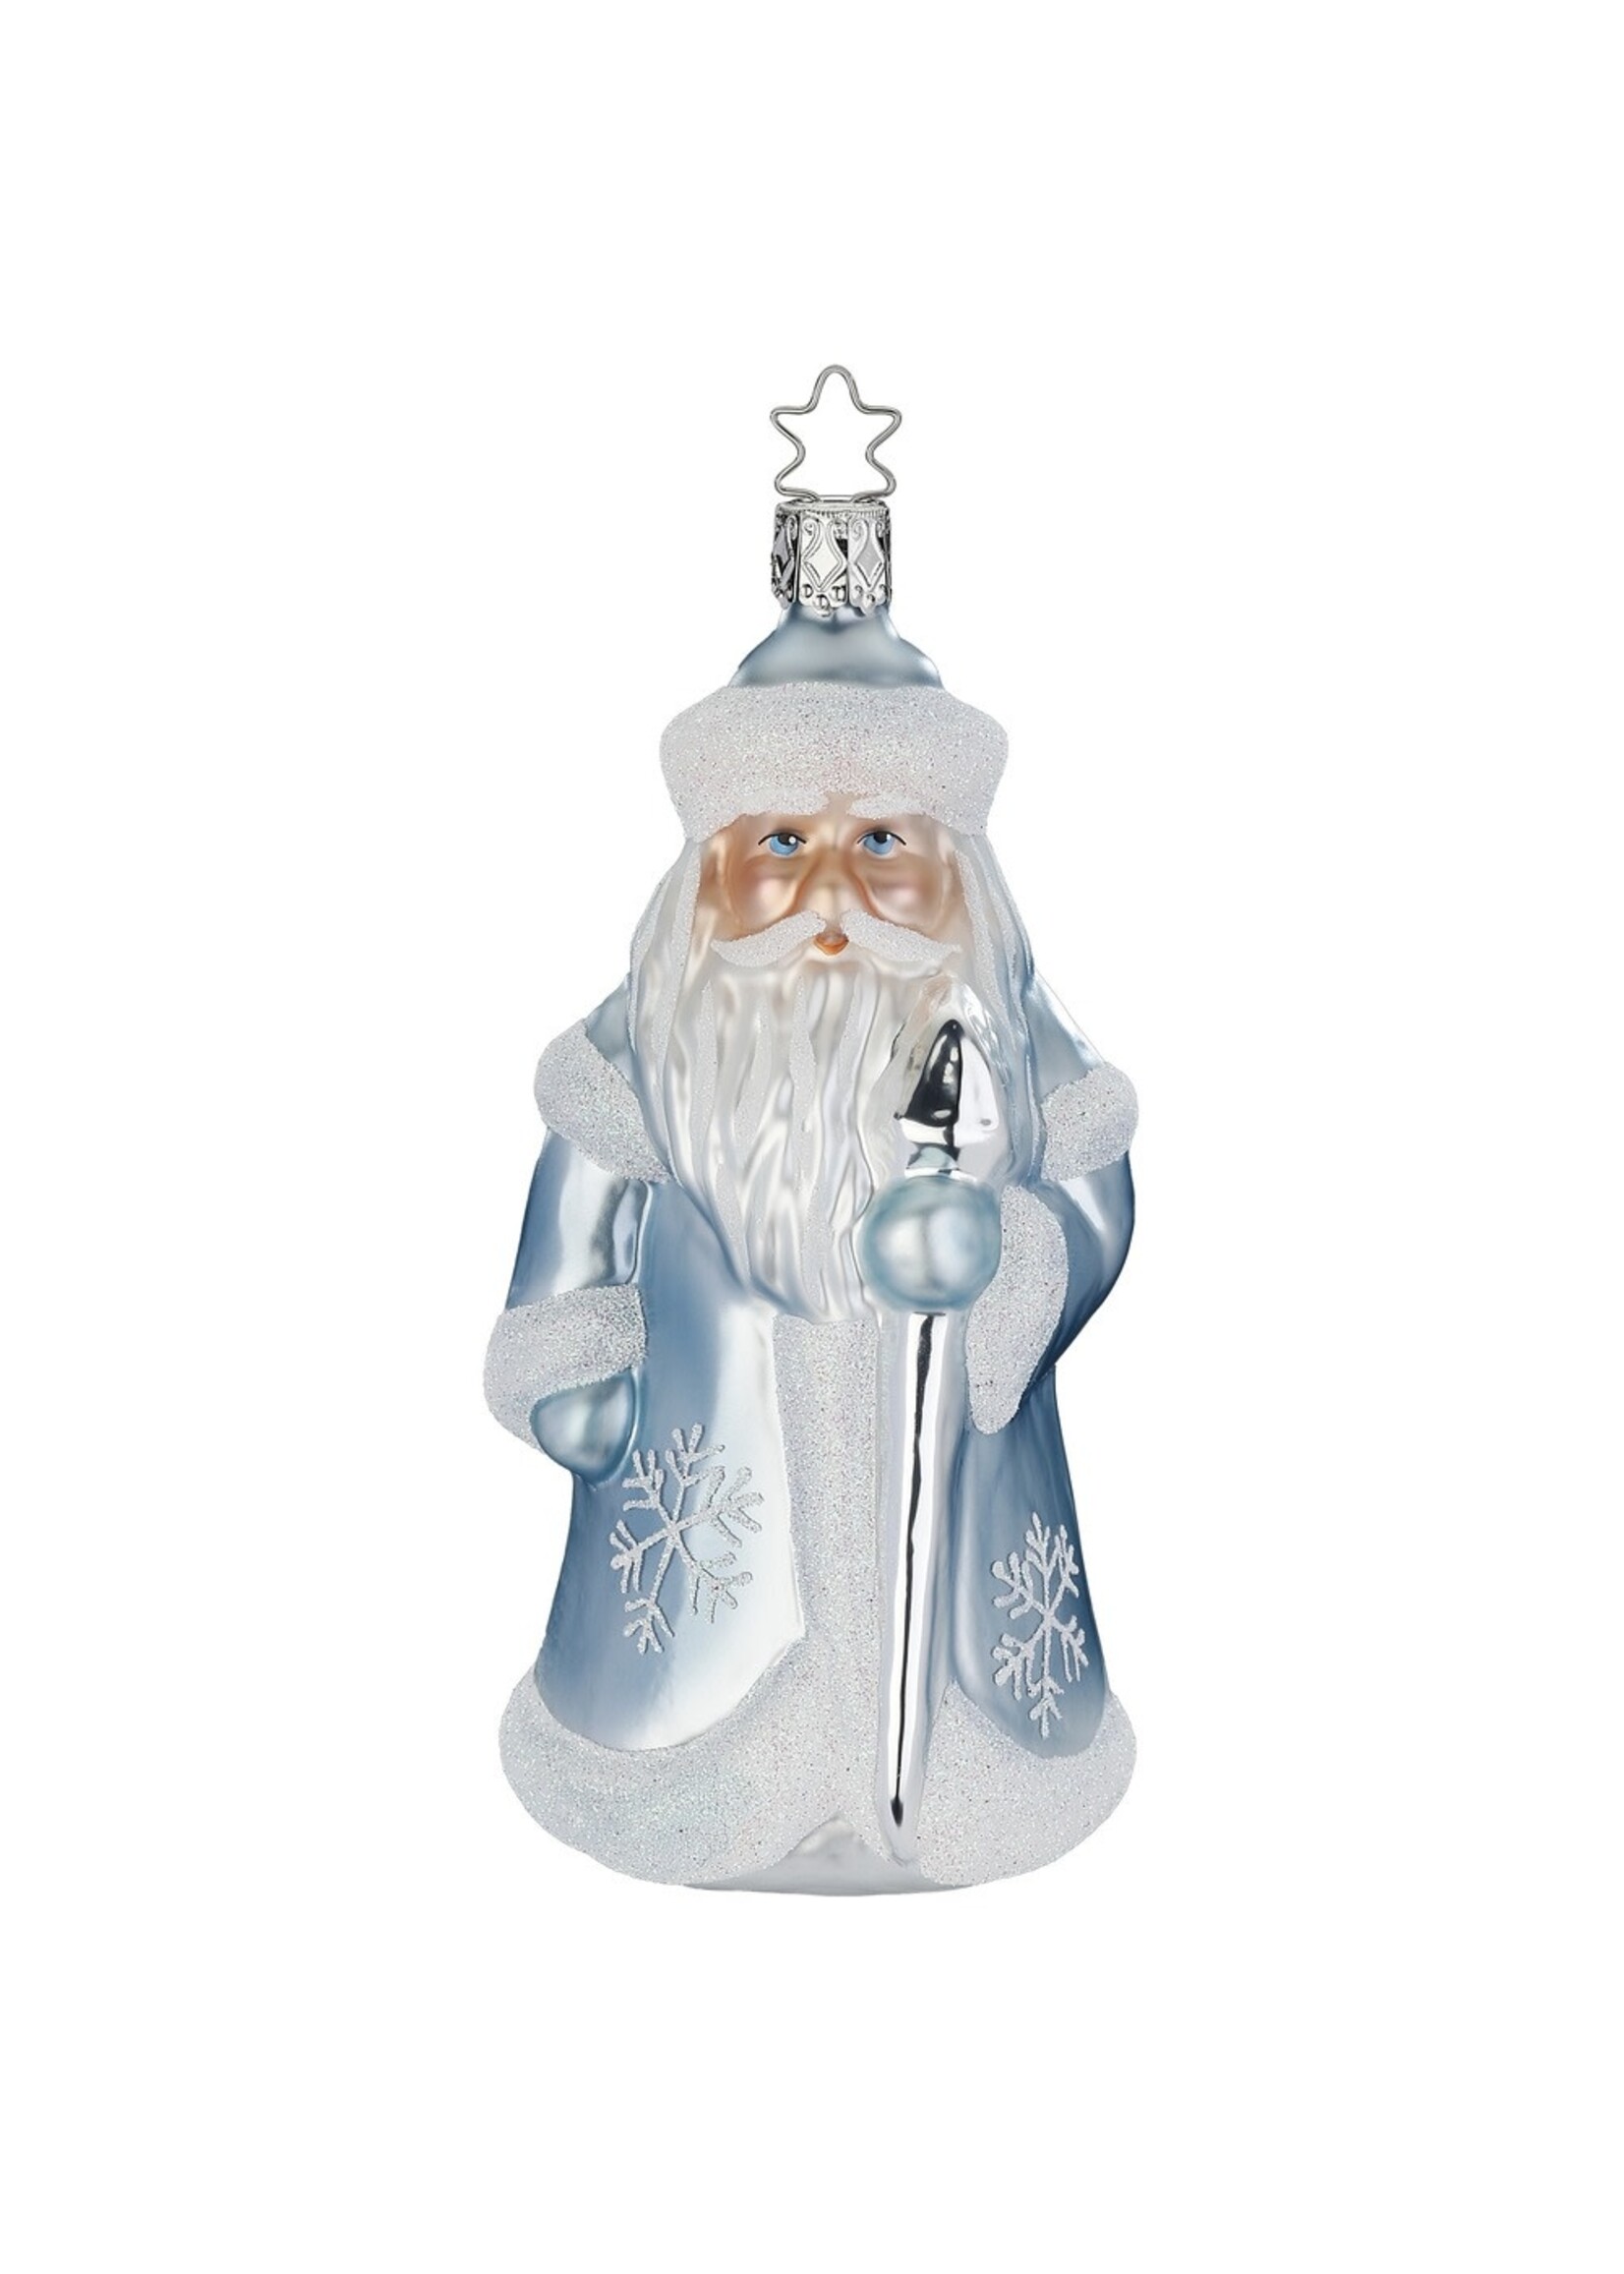 Ornament - Jack Frost 5.8”